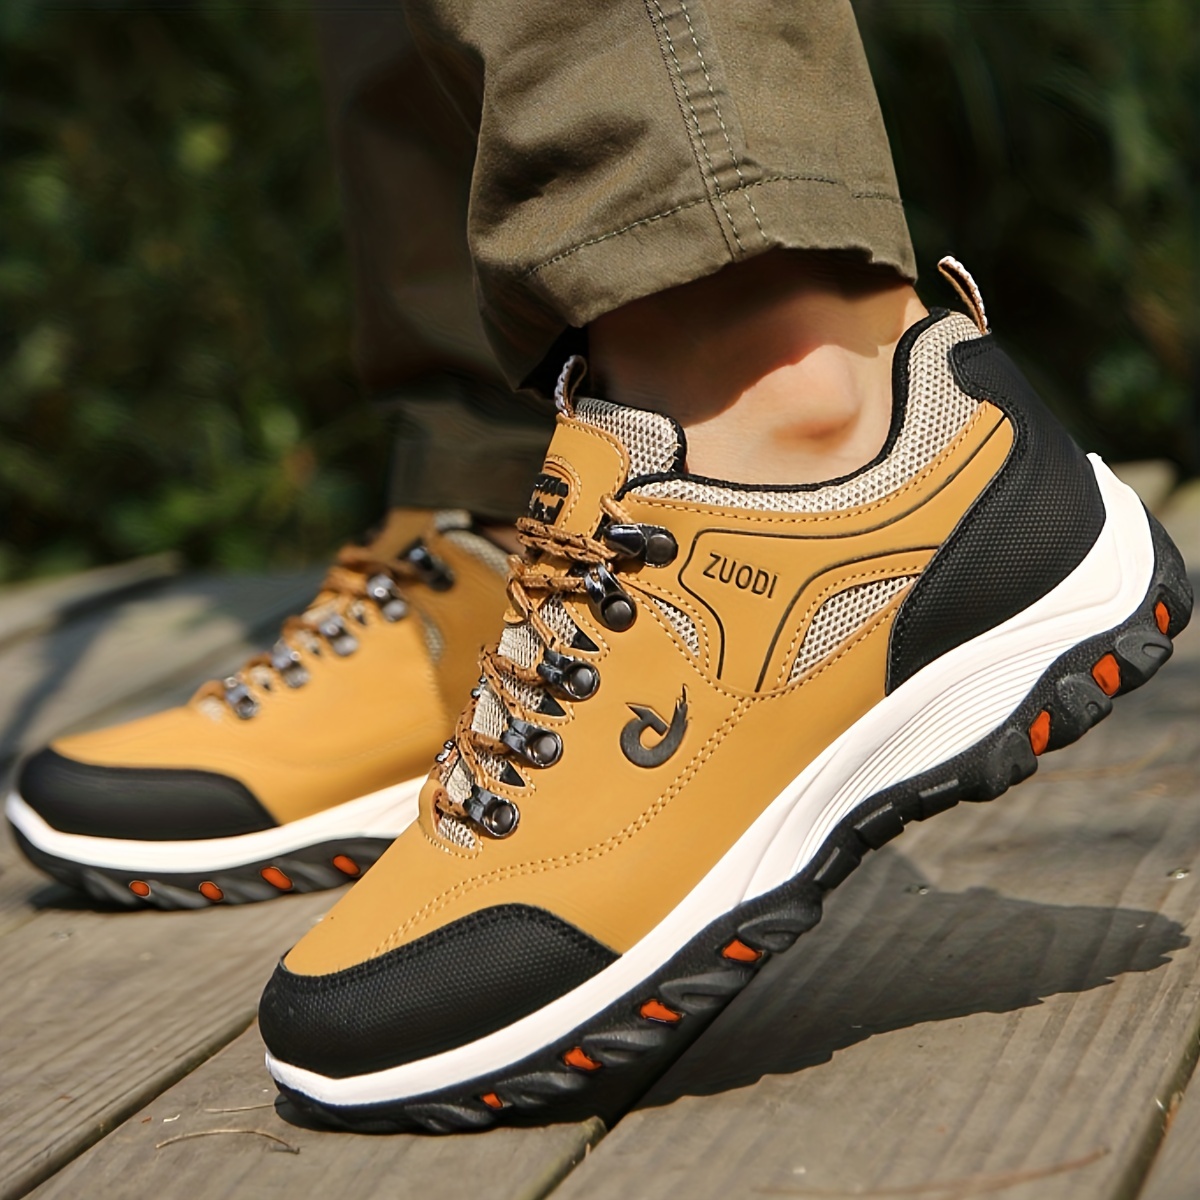 Men's Outdoor Casual Comfortable Light Shoes (Buy 2 Free Shipping)